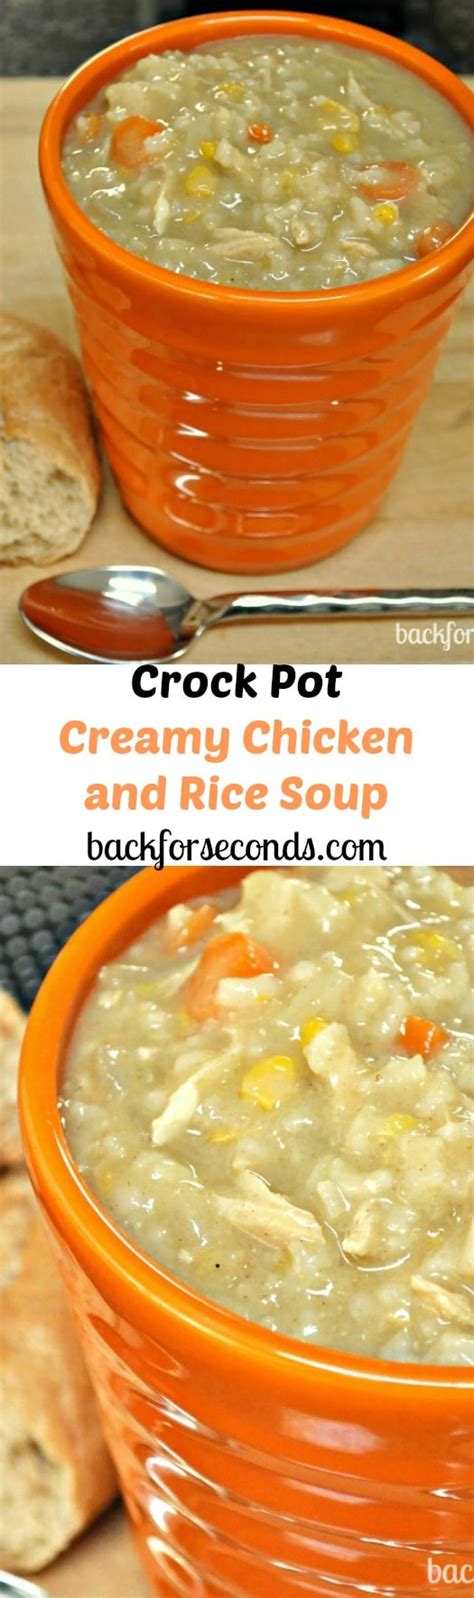 I'm sorry to hear you haven't had much luck finding the. Easy Crock Pot Creamy Chicken and Rice Soup - Back for Seconds